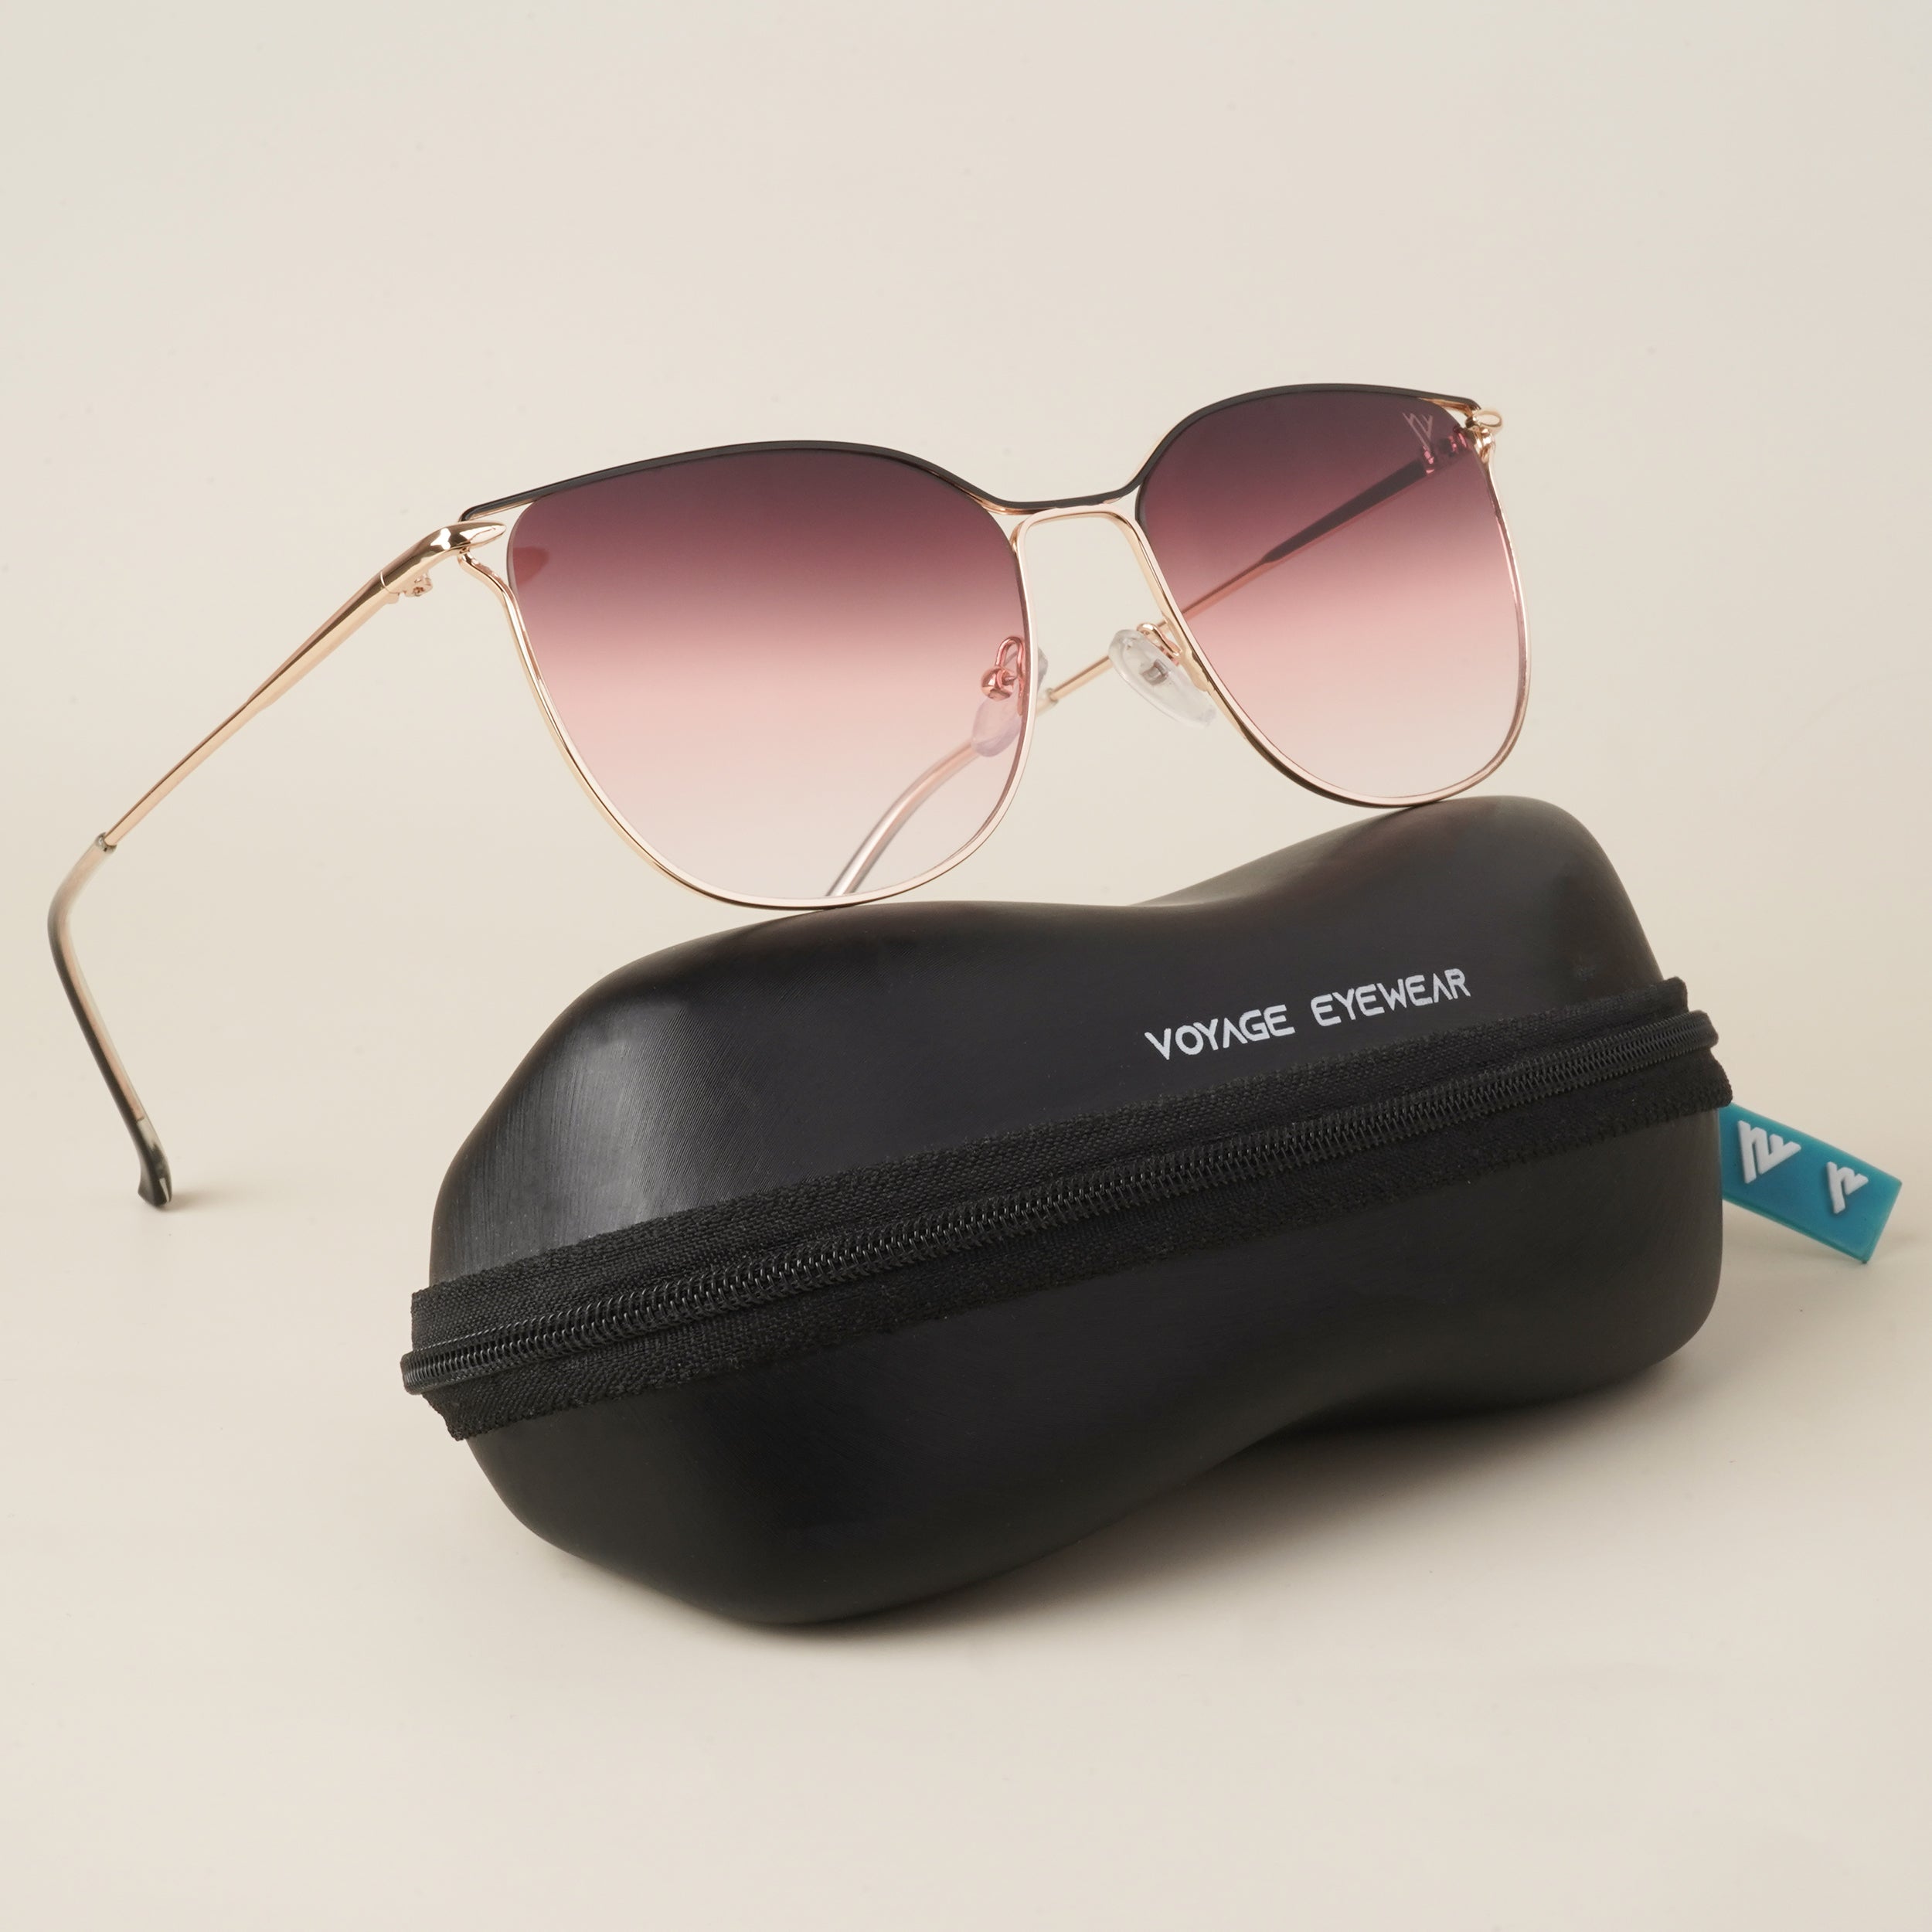 Voyage Pink Over Size Sunglasses - MG3238